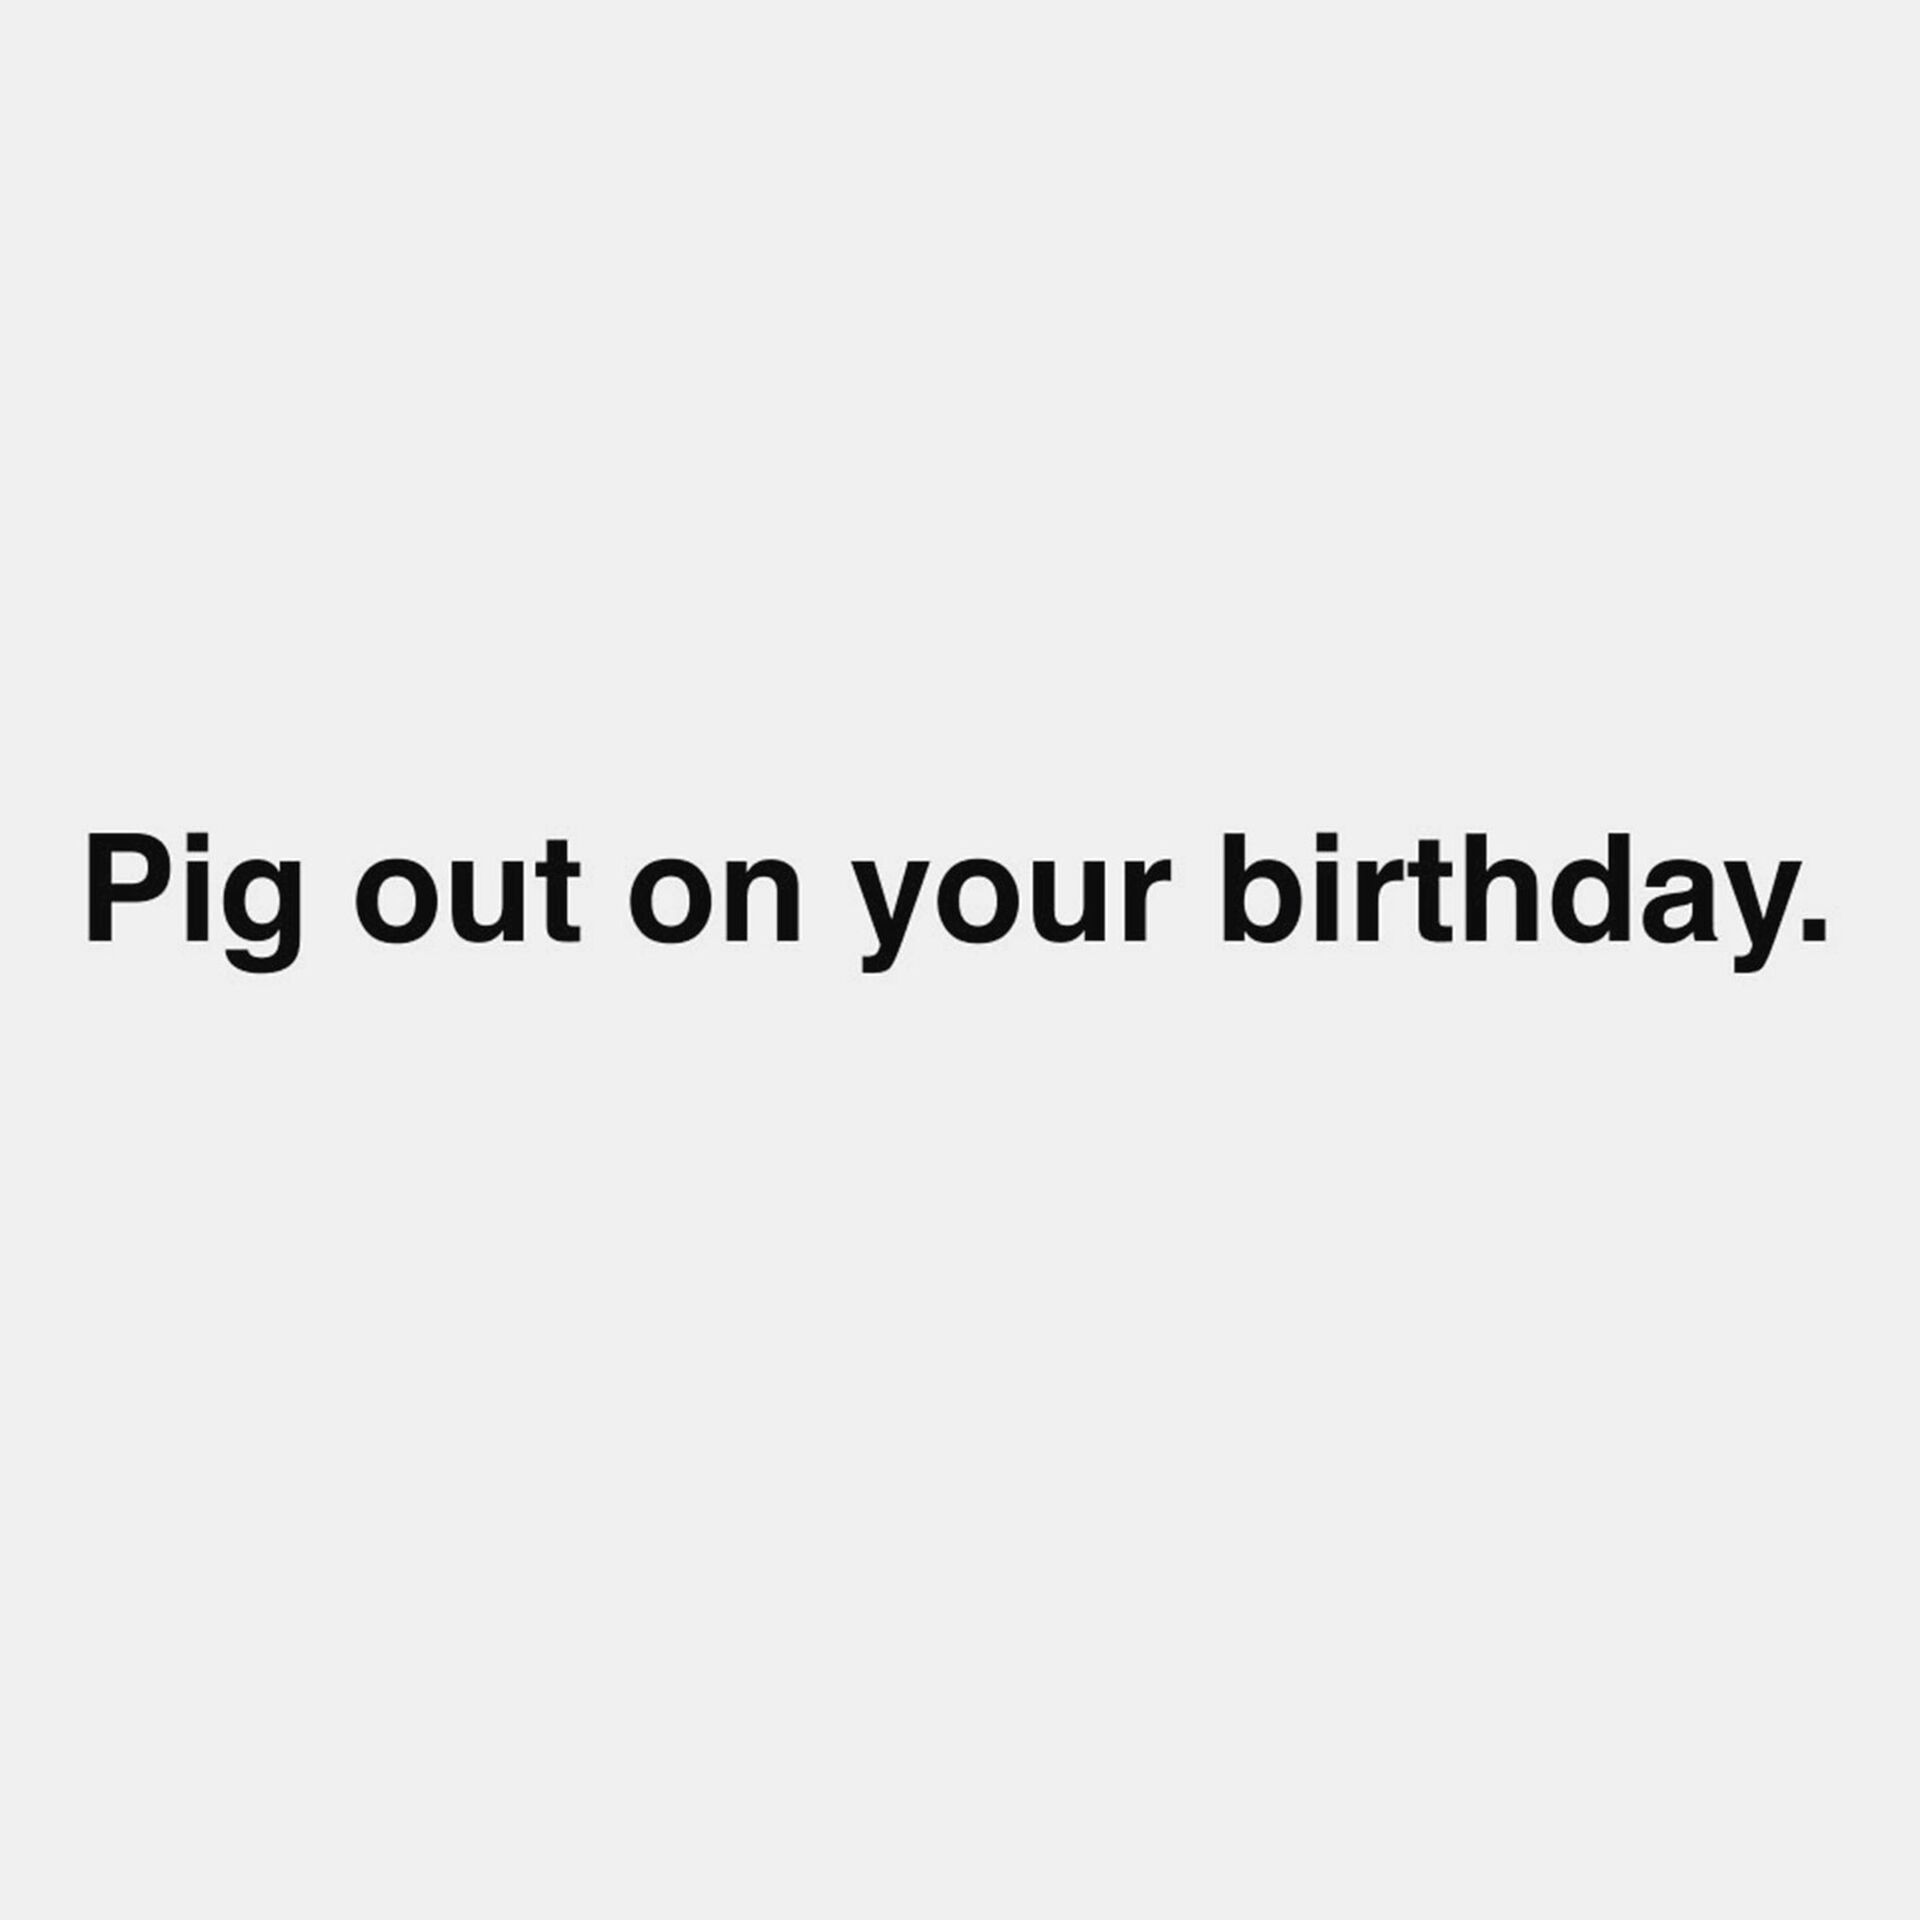 Pig-Eating-Pizza-Meme-Funny-Birthday-Card_369ZZB8863_02